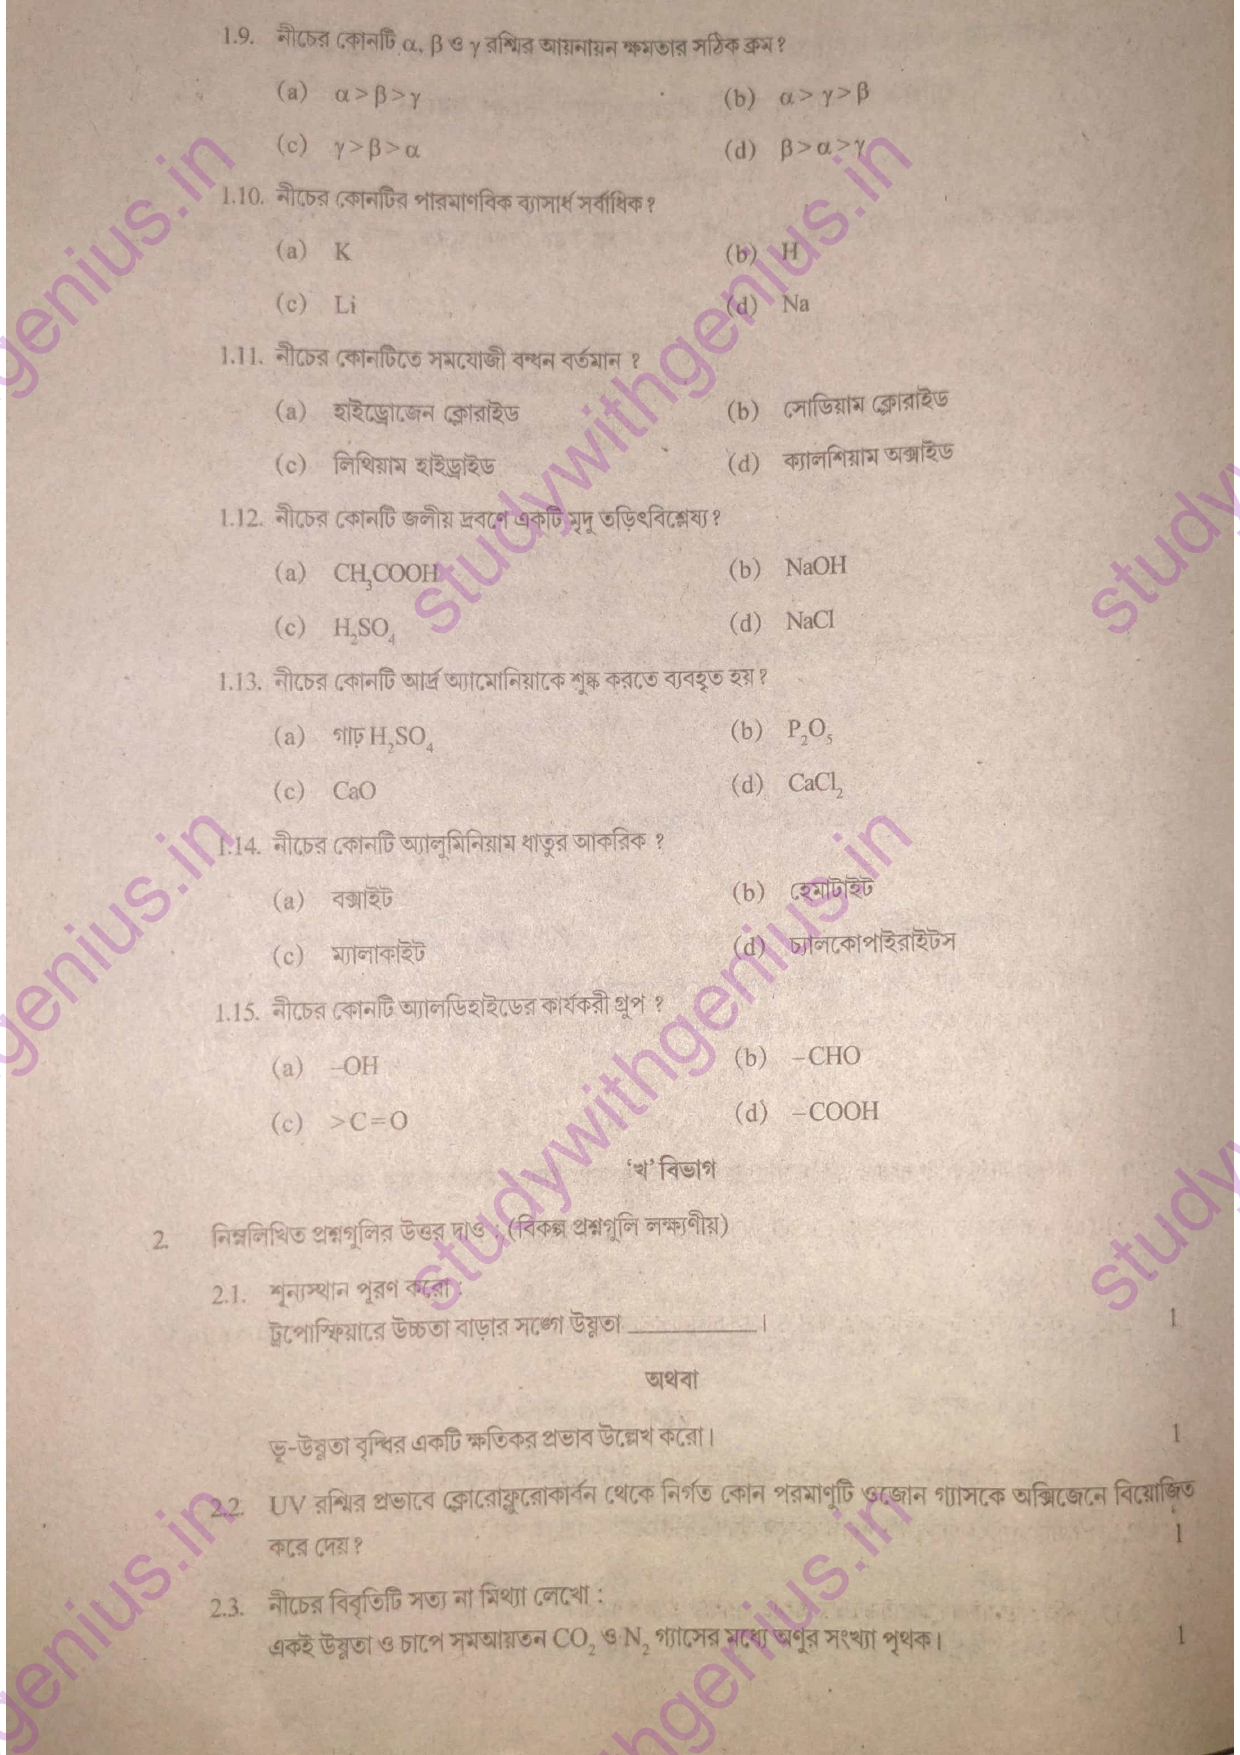 WBBSE Madhyamik Physical Science Subject Question Papers Bengali Medium 2017